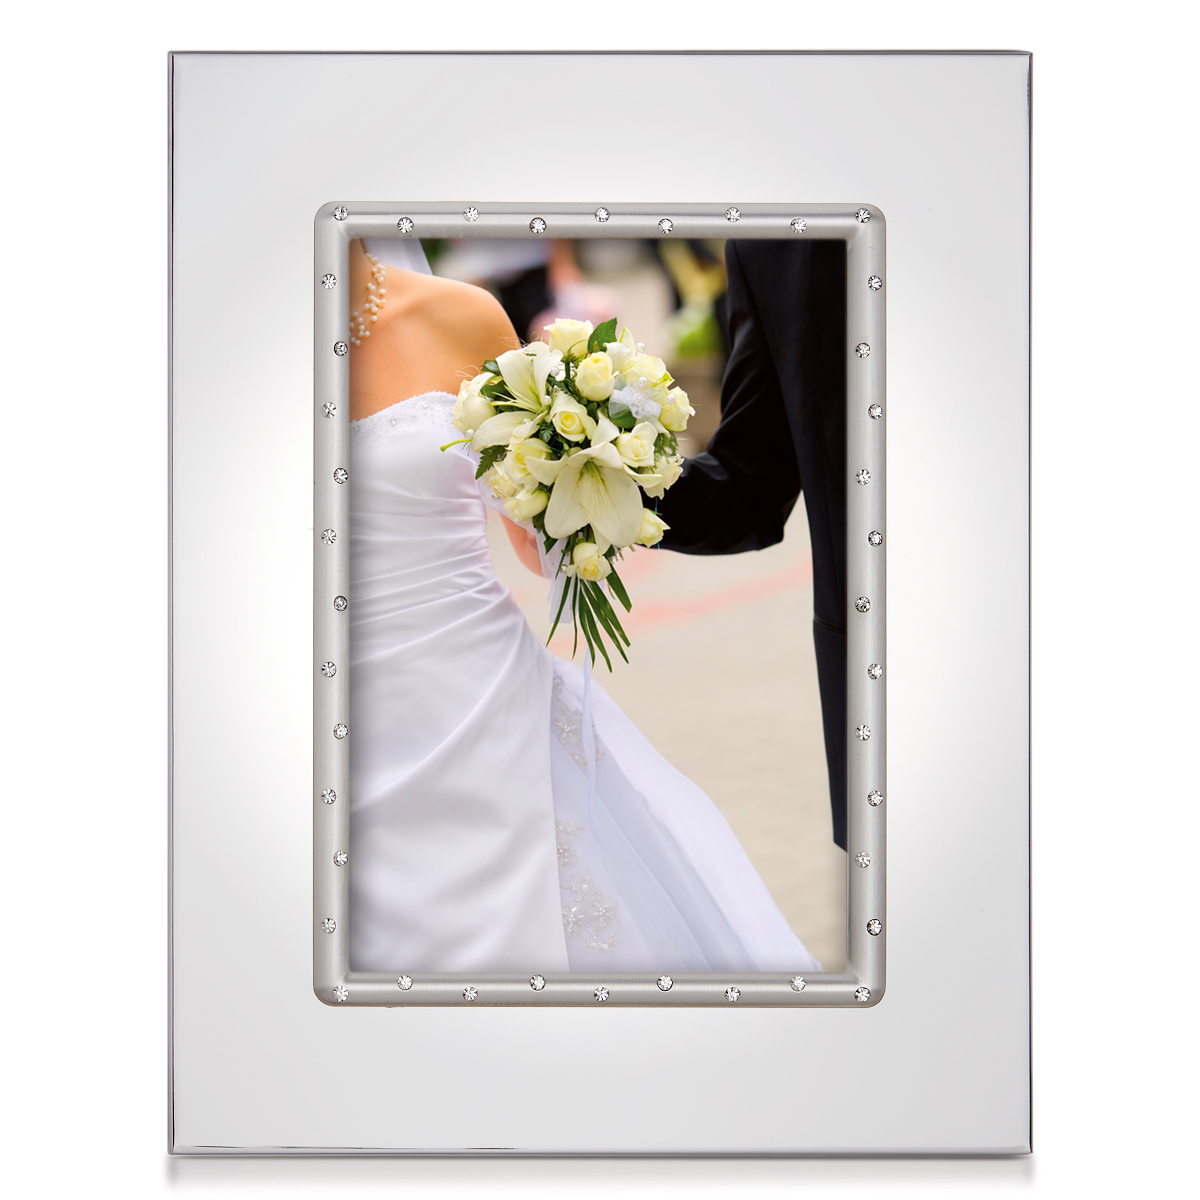 Lenox Devotion Silverplated 5 x 7" Picture Frame